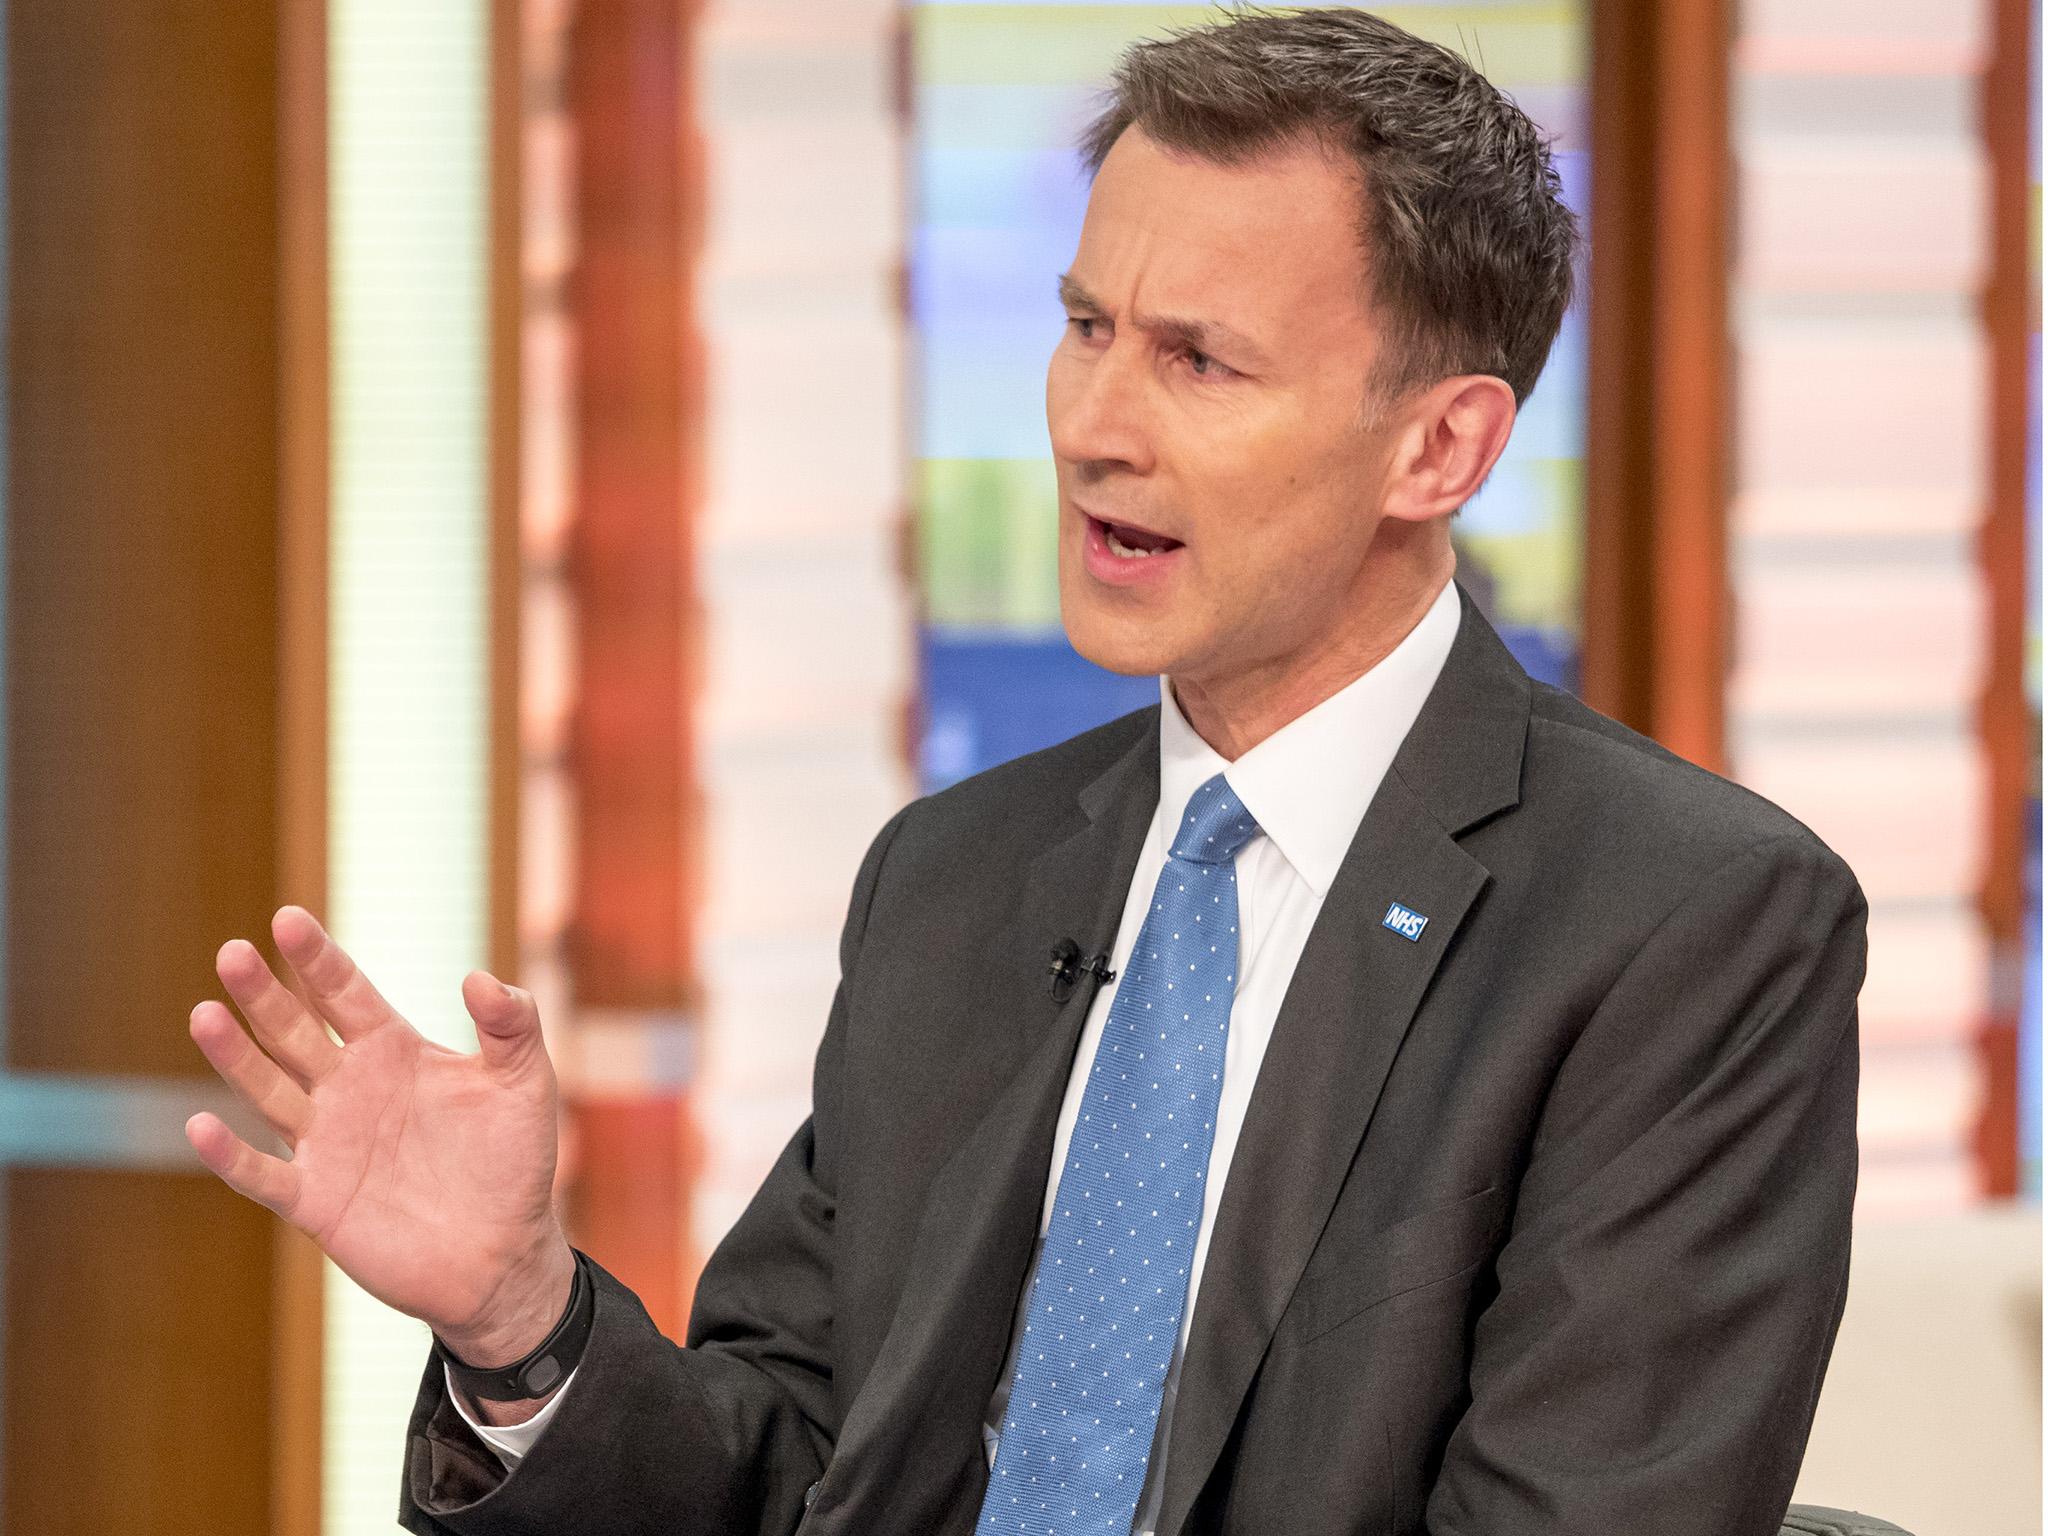 Under Hunt, 59 per cent of NHS staff reported working unpaid overtime each week in 2016